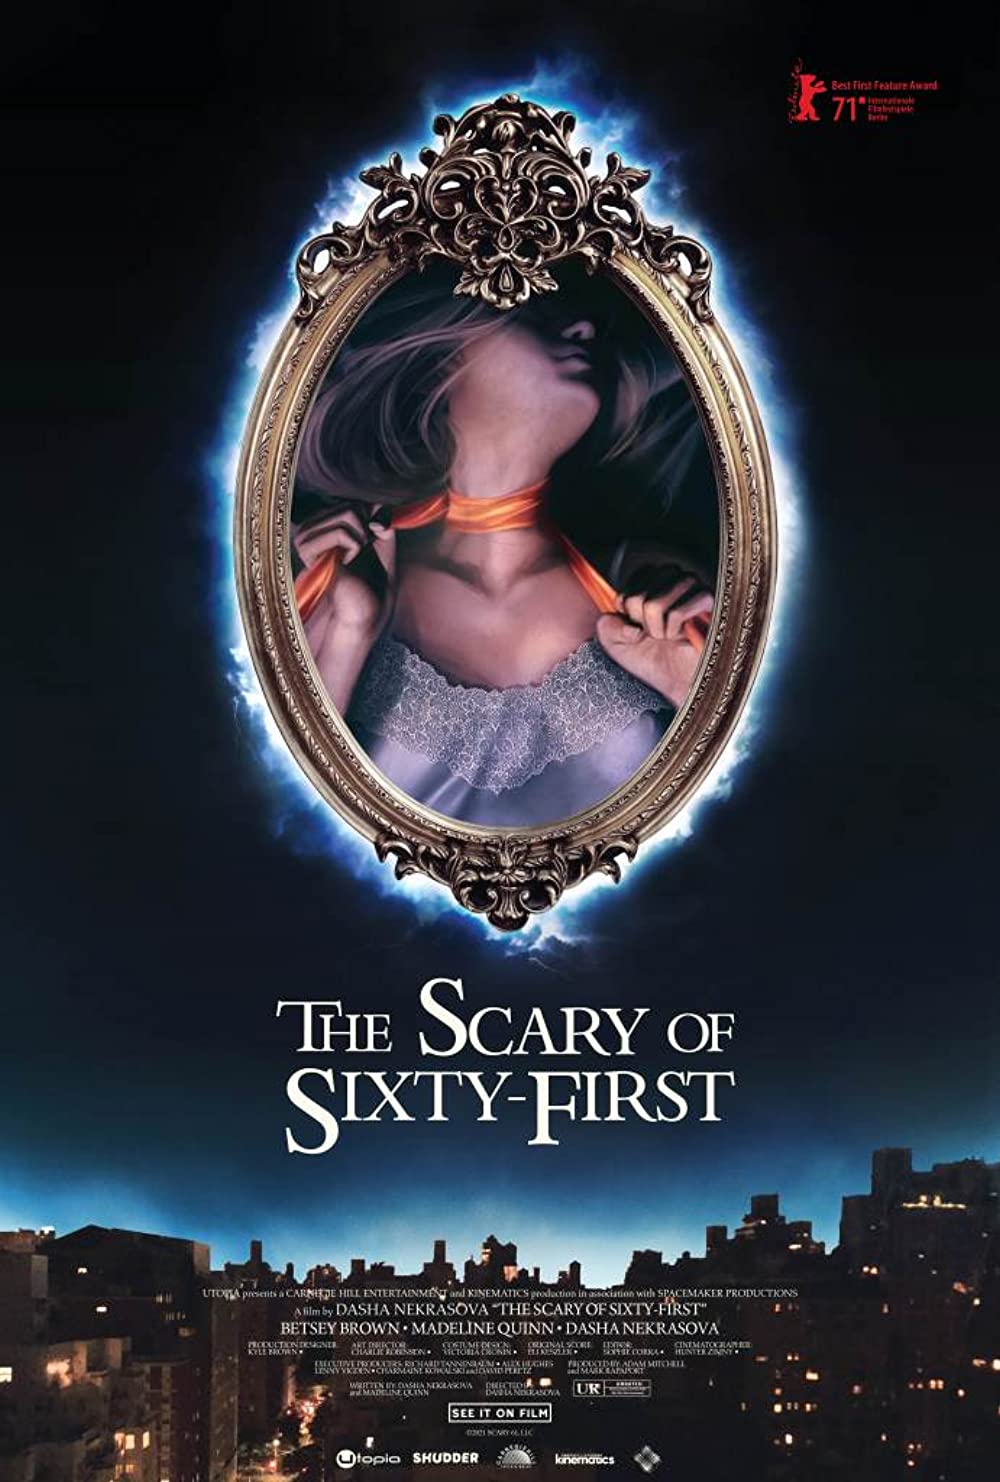 18+ The Scary of Sixty First 2021 English Full Movie 1080p HDRip 1.42GB Download